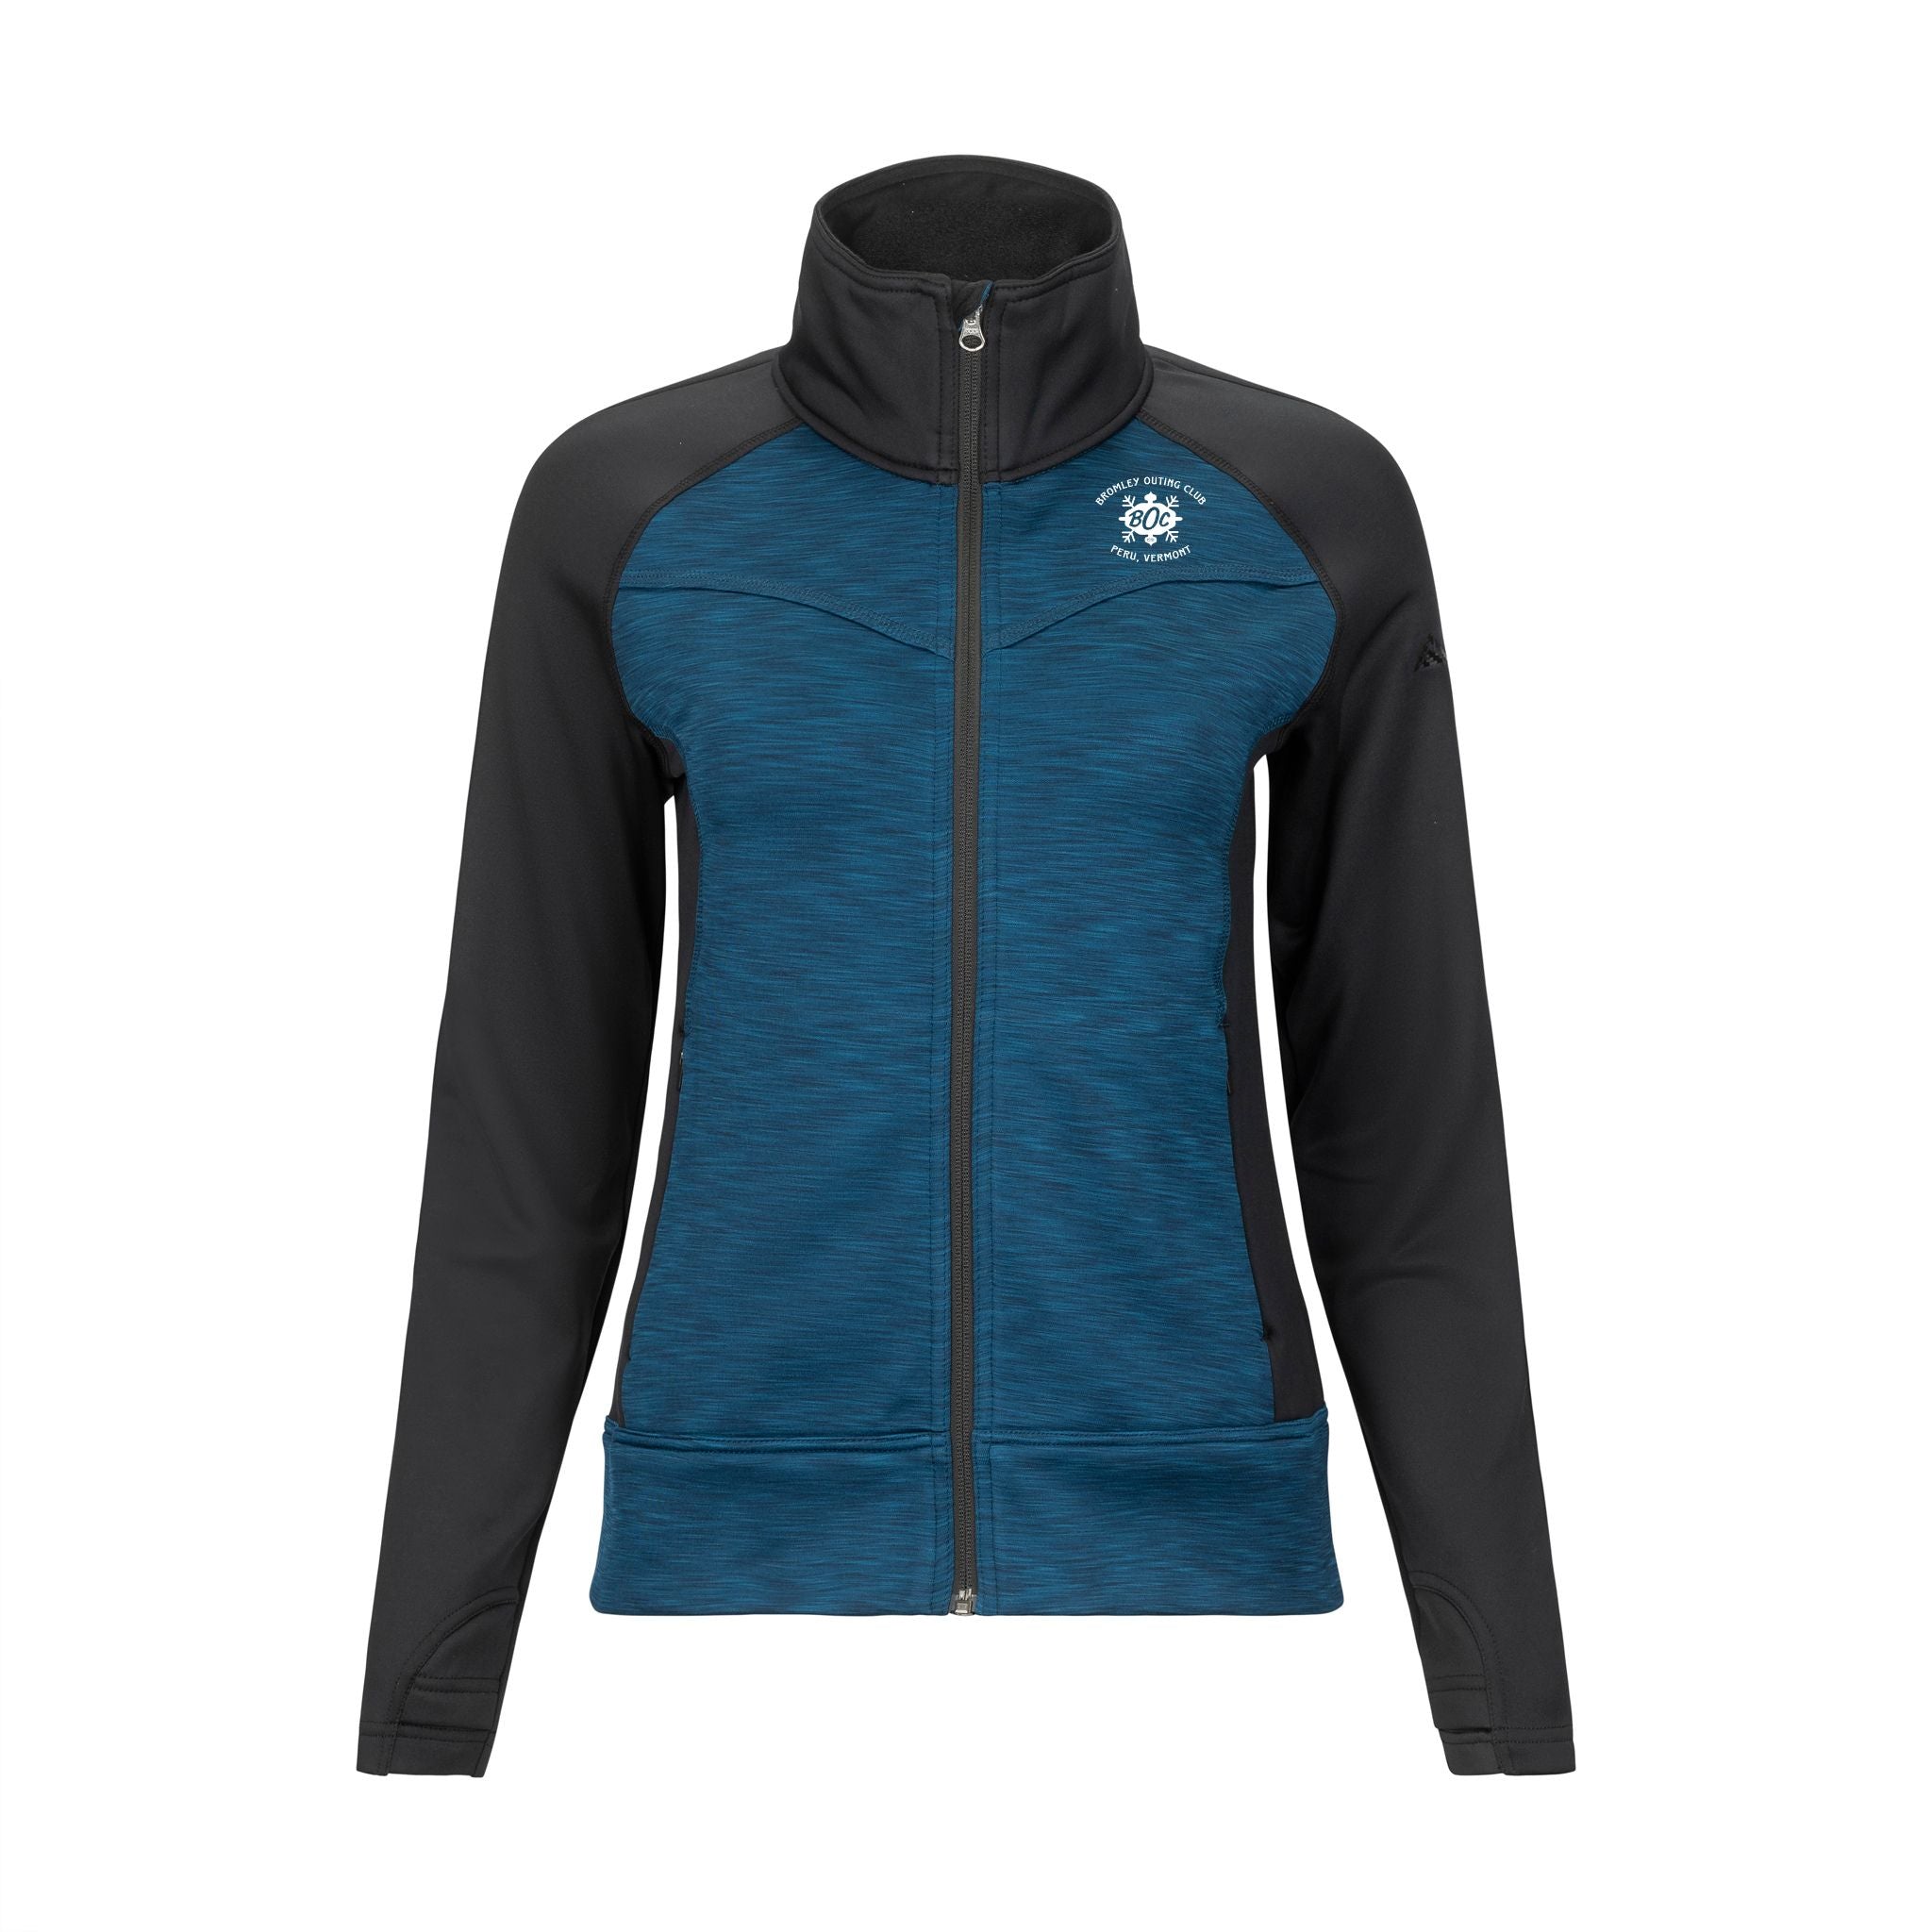 Women's Benchmark Jacket - Bromley Outing Club